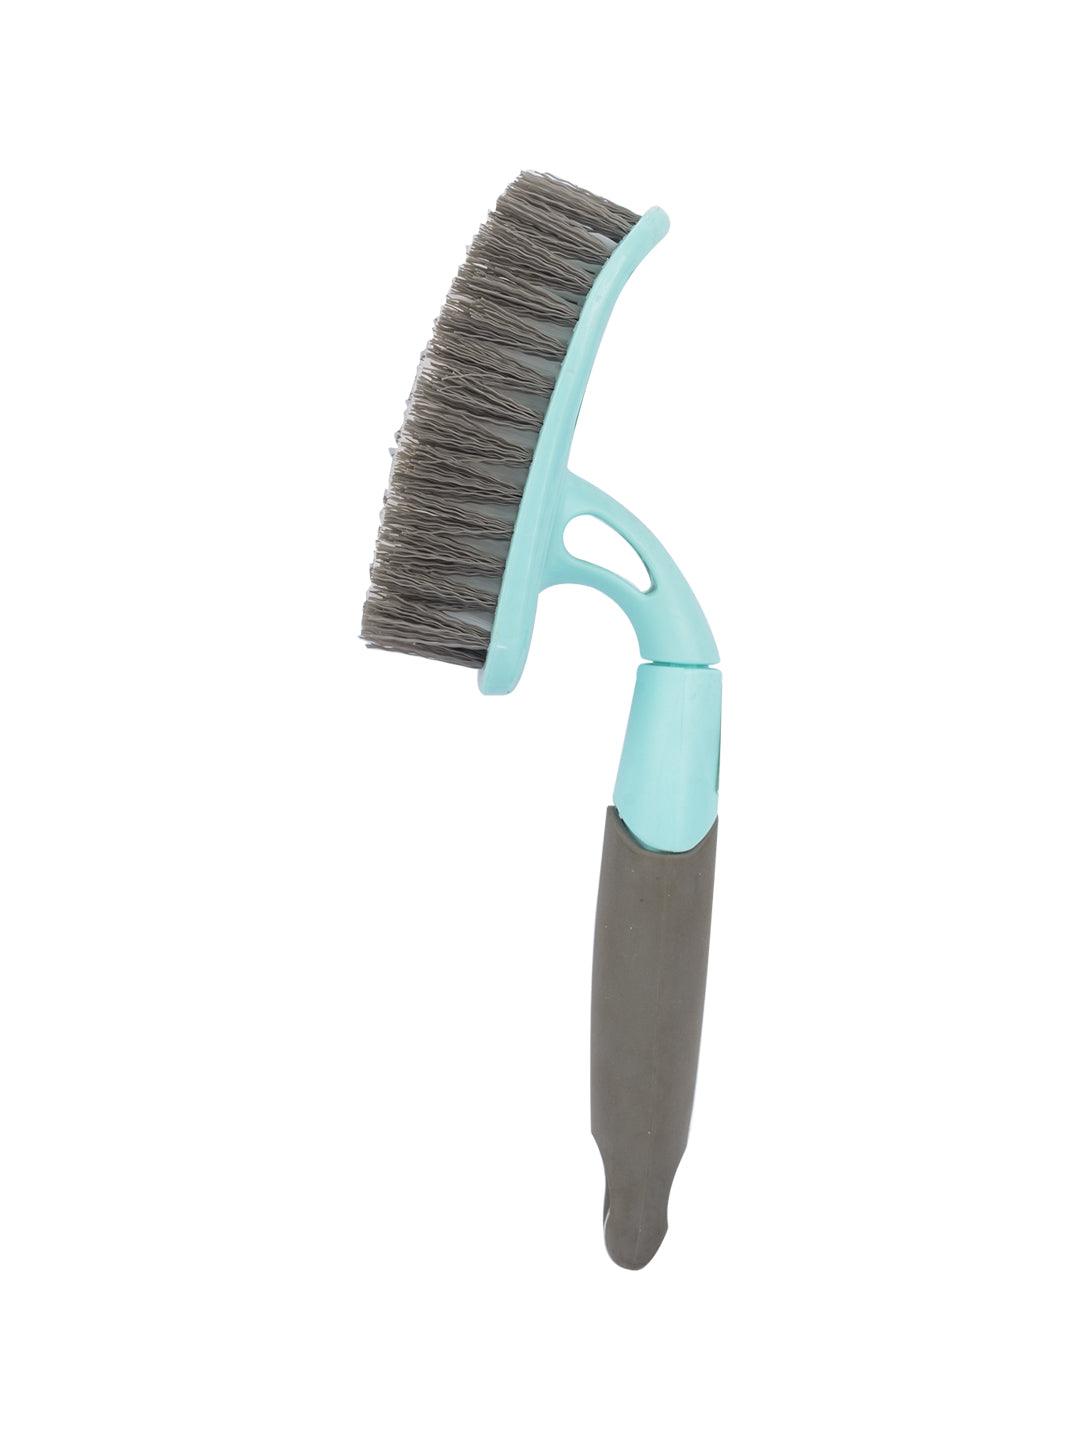 Market 99 Cleaning Brush (Assorted), Colorblock, Assorted, Plastic - MARKET 99